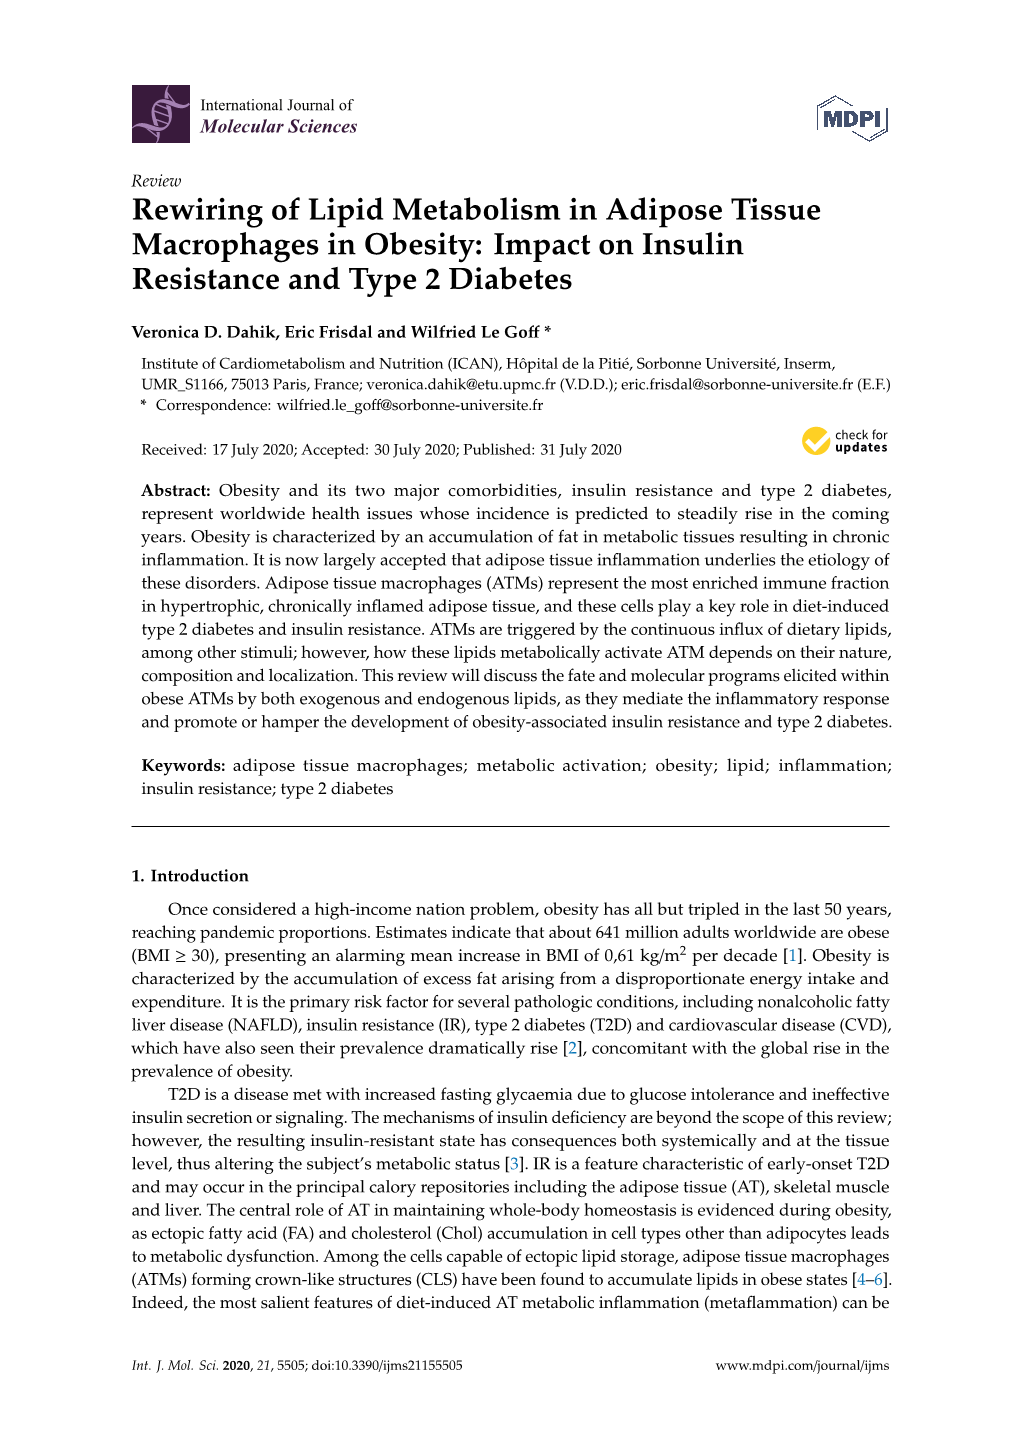 Rewiring of Lipid Metabolism in Adipose Tissue Macrophages in Obesity: Impact on Insulin Resistance and Type 2 Diabetes